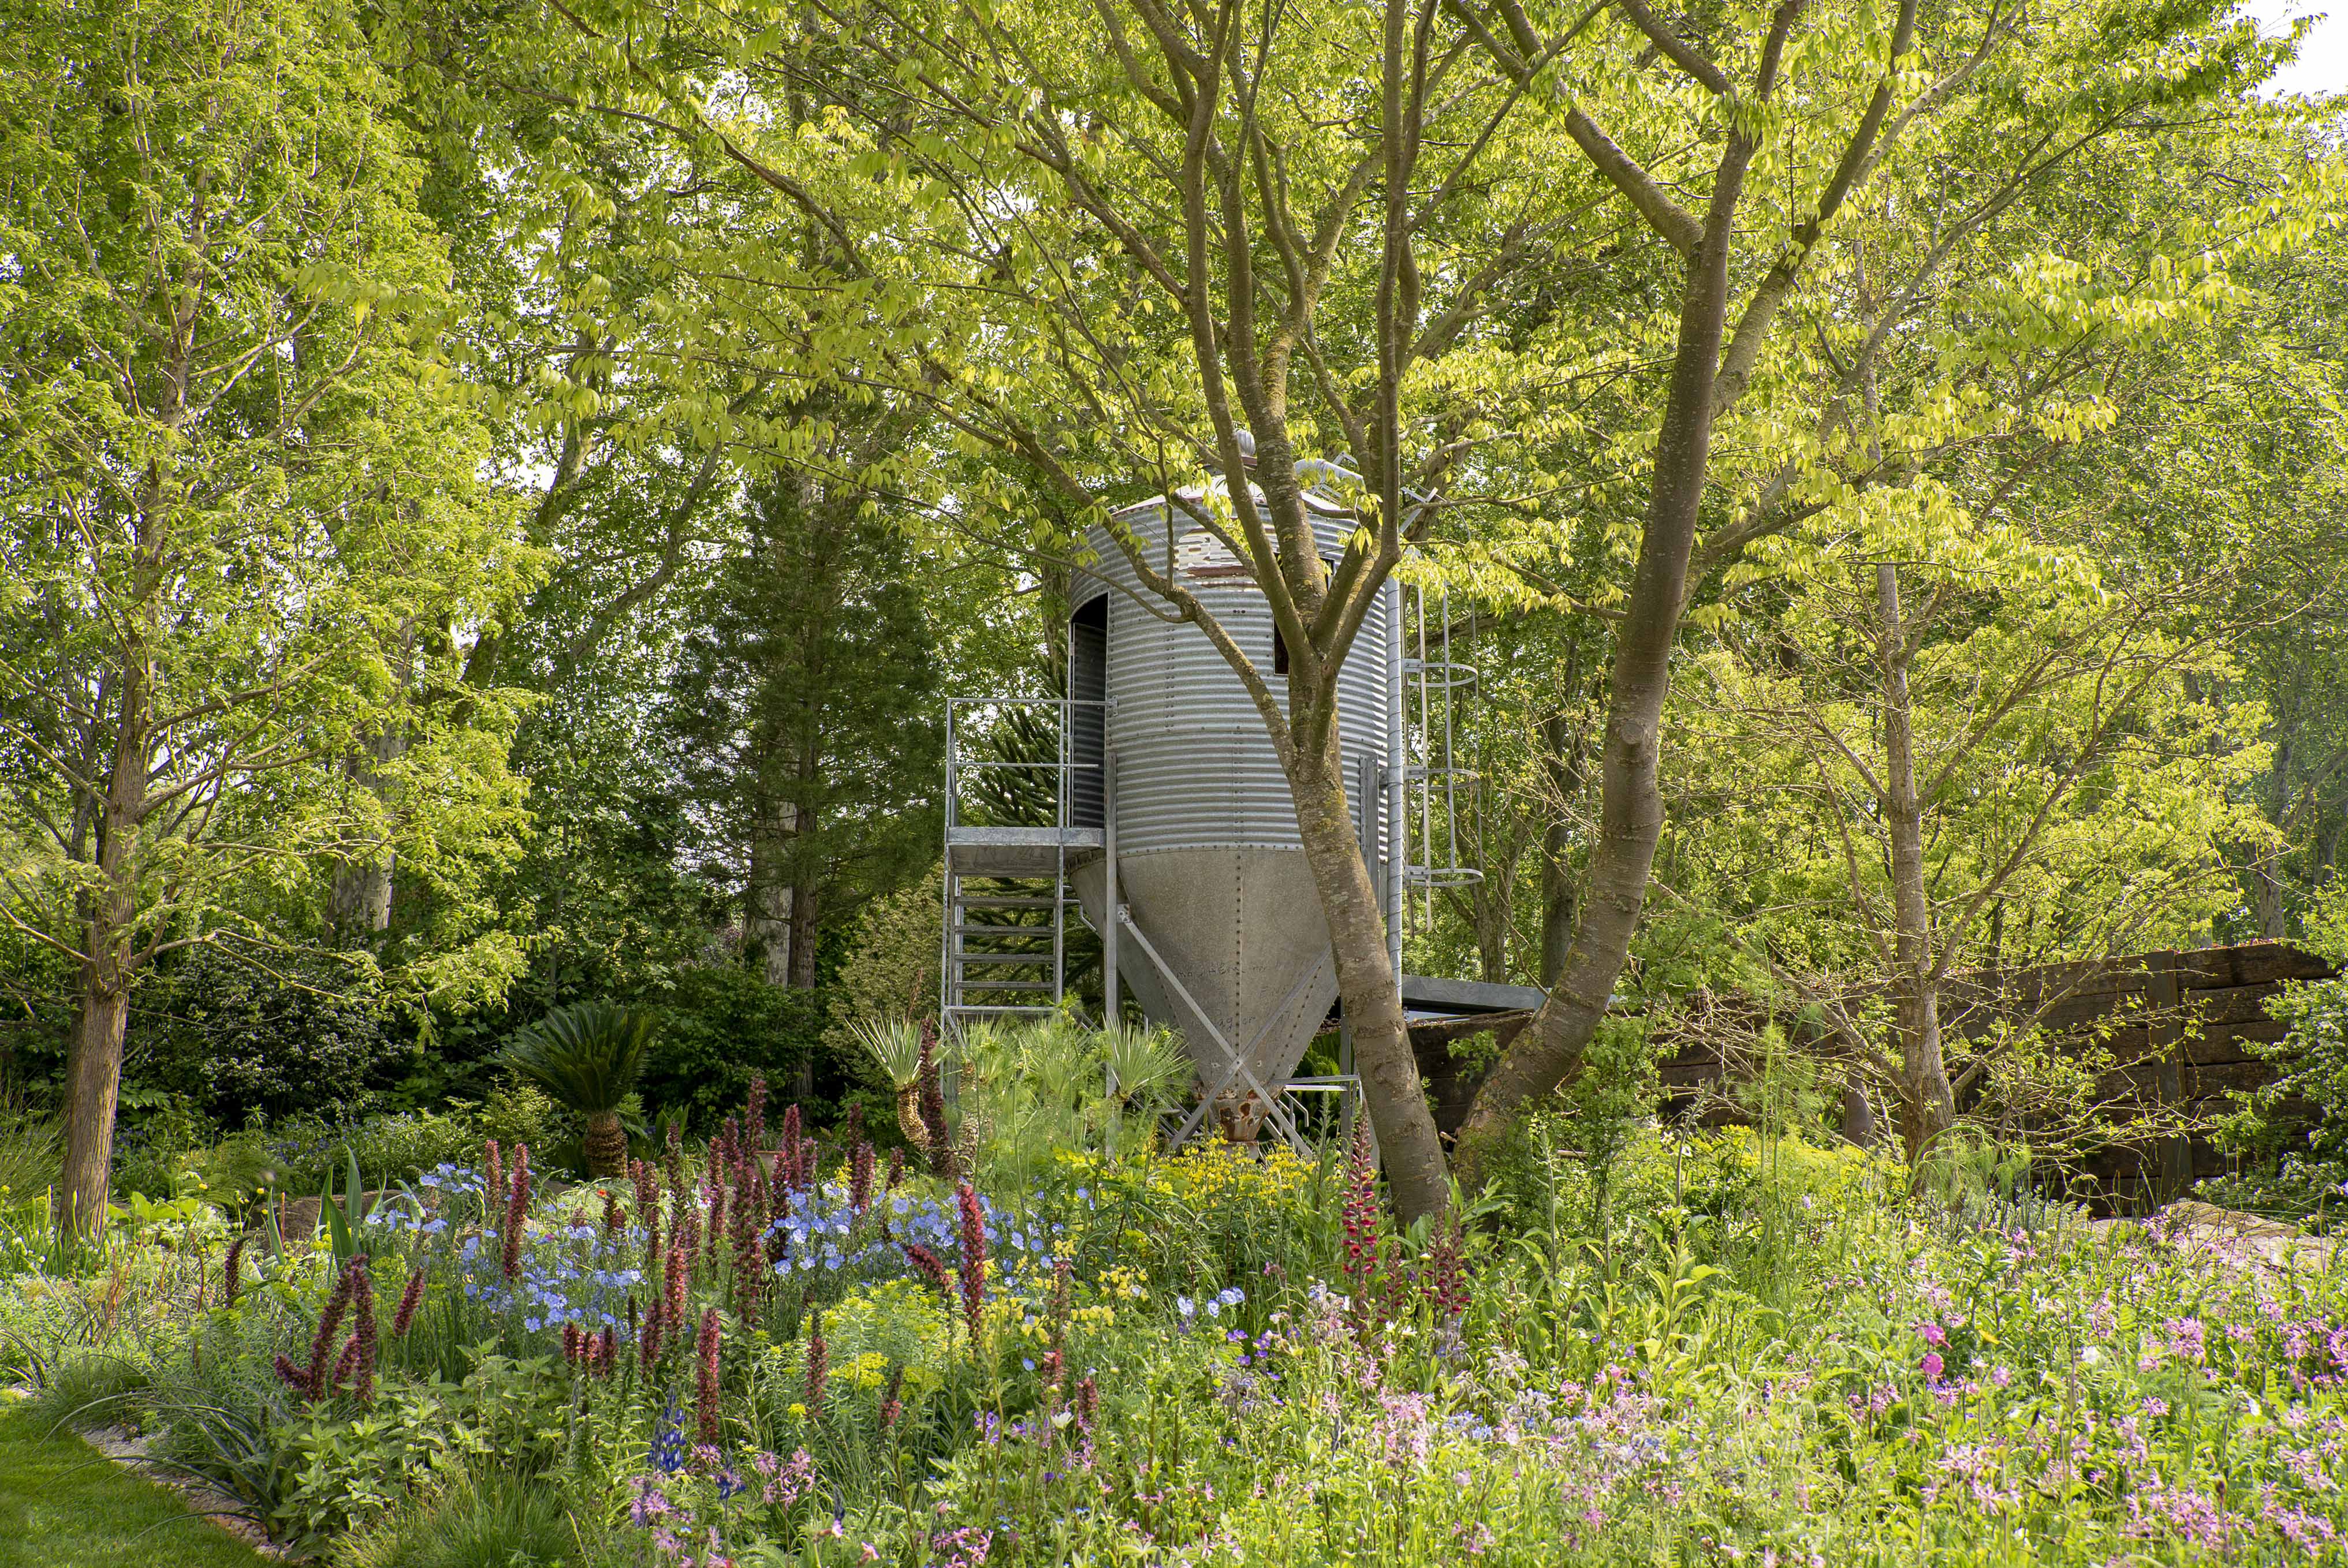 Gold and best constructed garden at RHS Chelsea 2019